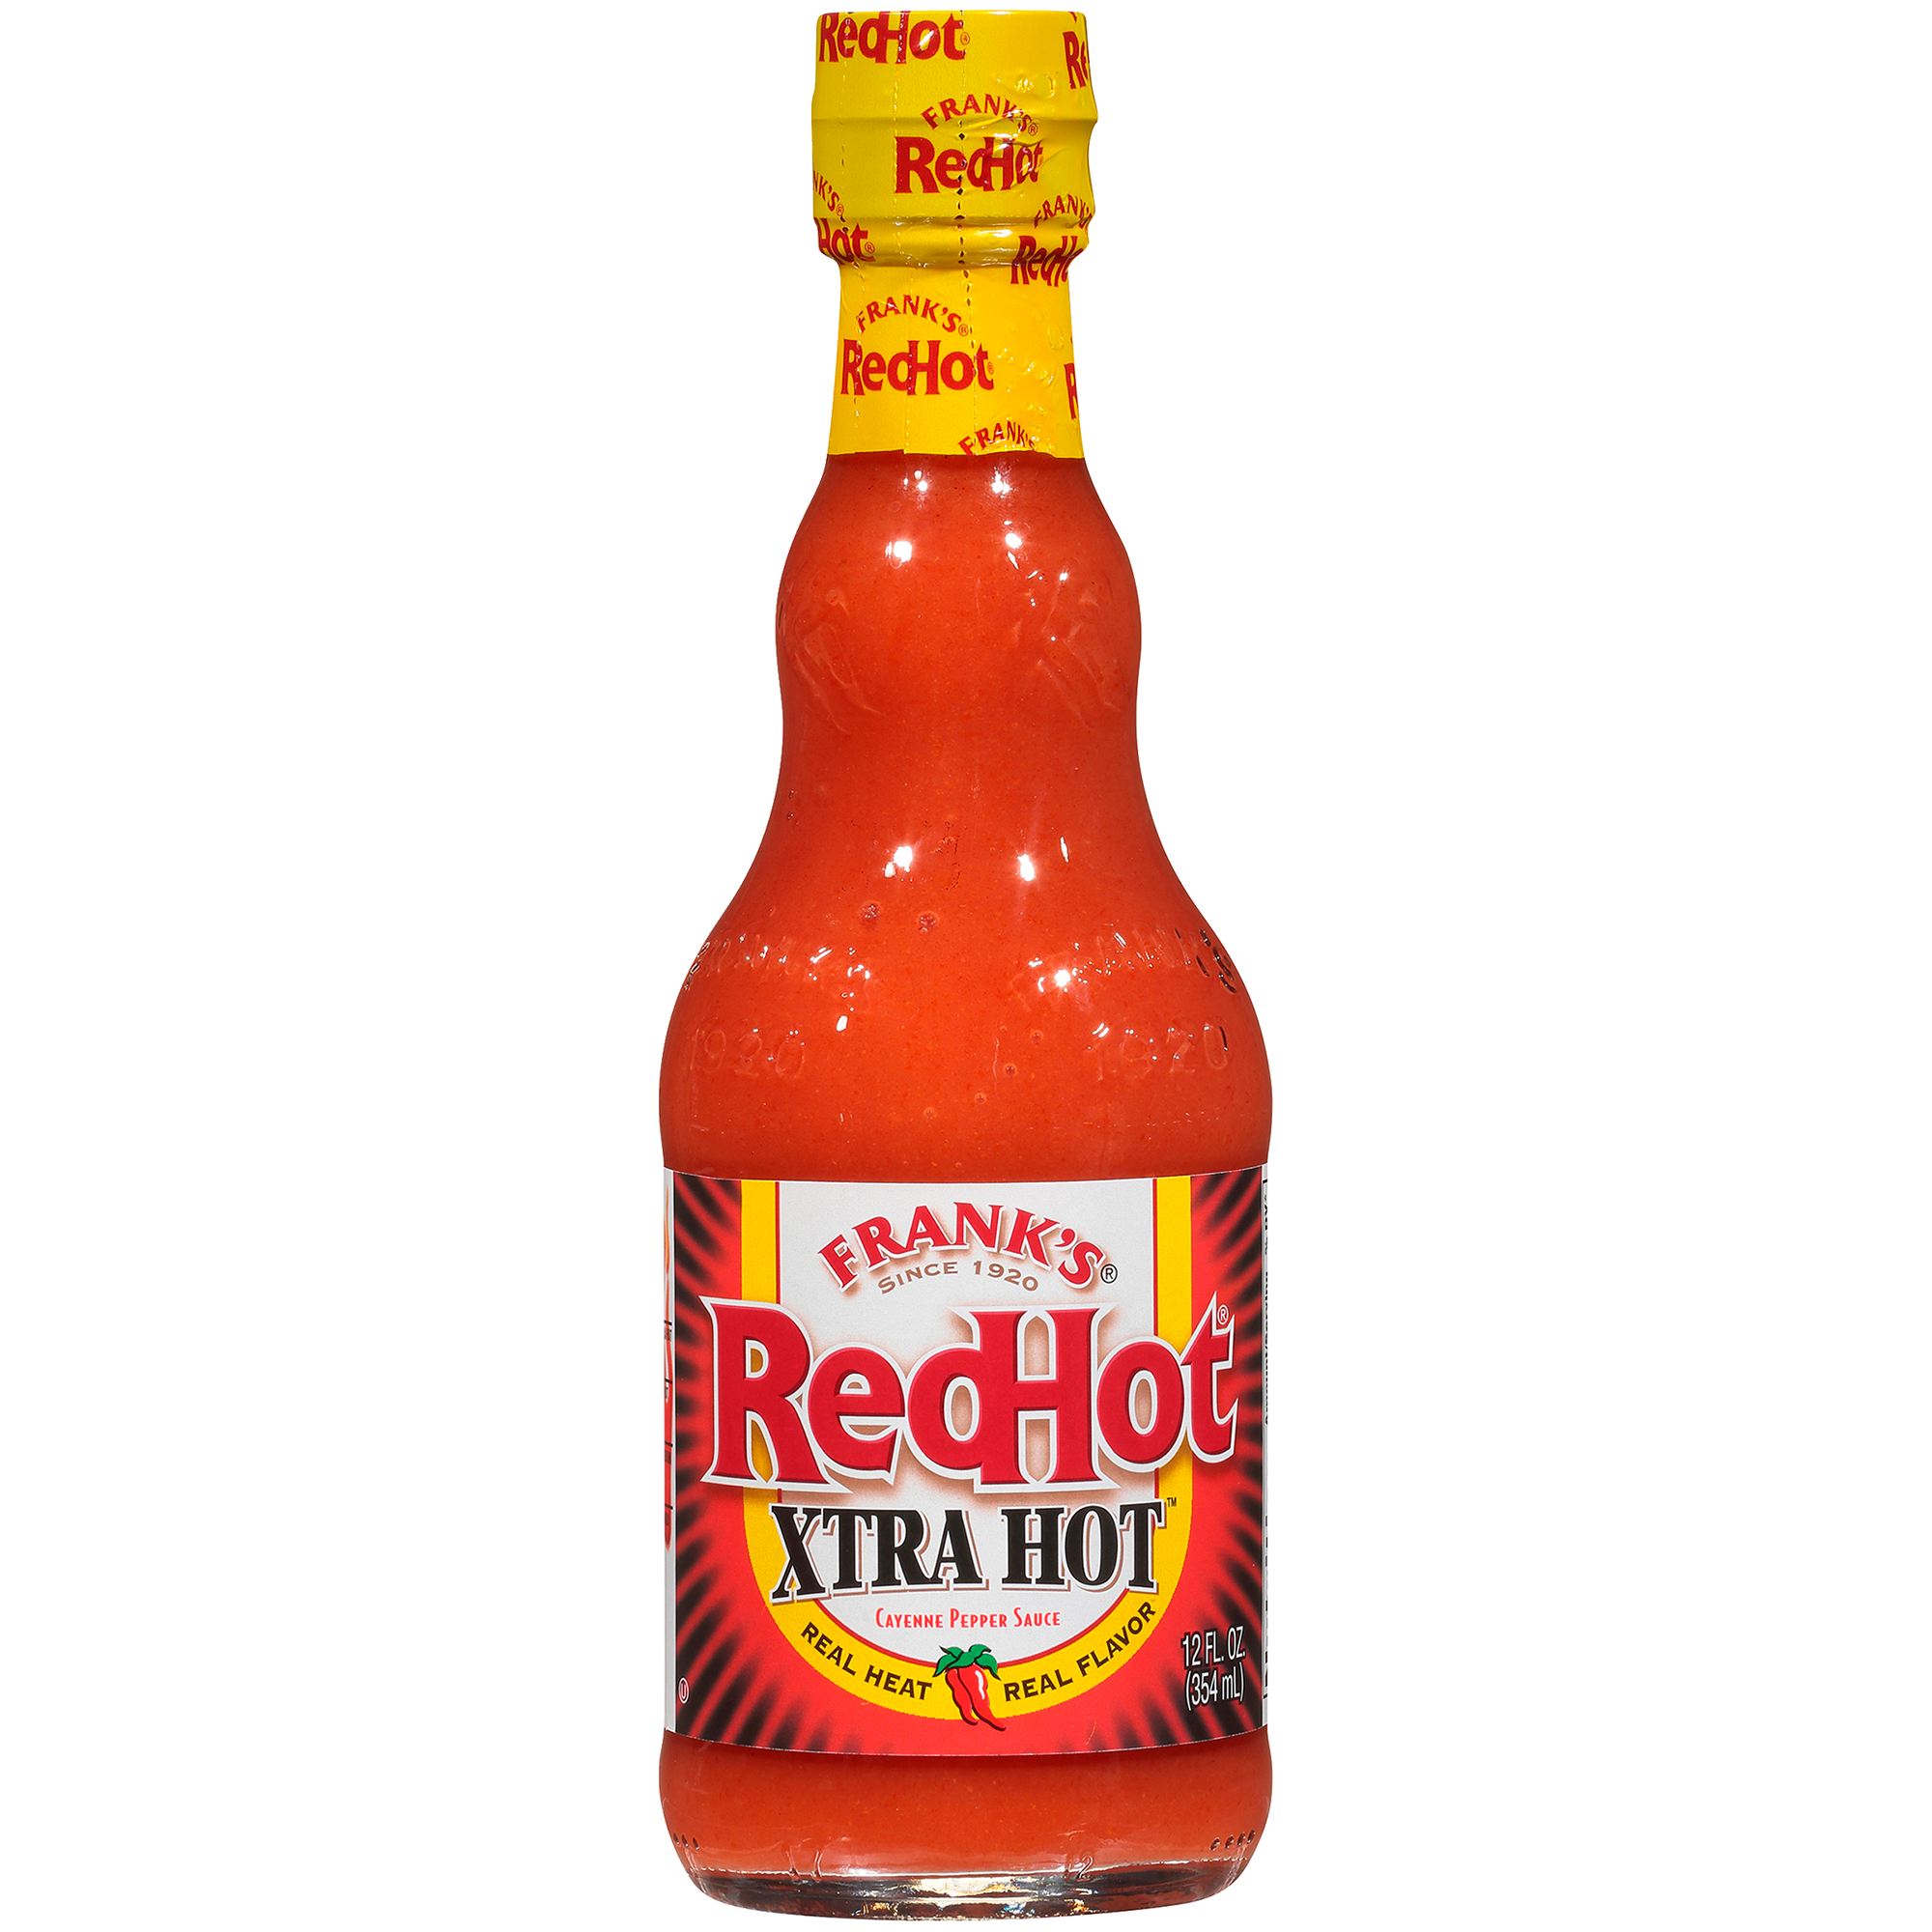 SALSA EXTRA PICANTE FRANK'S REDHOT®